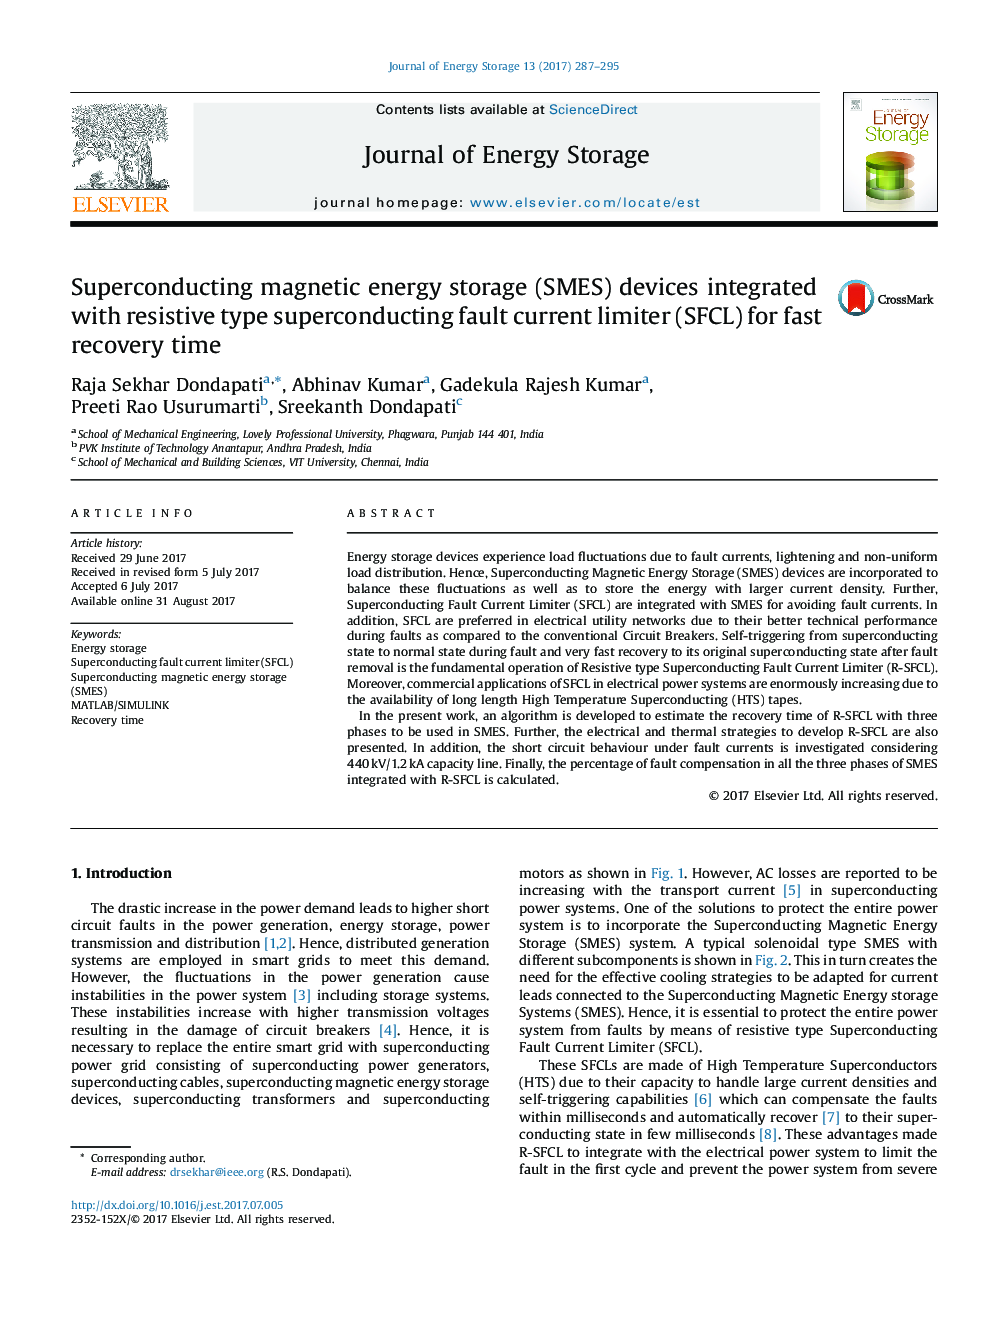 Superconducting magnetic energy storage (SMES) devices integrated with resistive type superconducting fault current limiter (SFCL) for fast recovery time